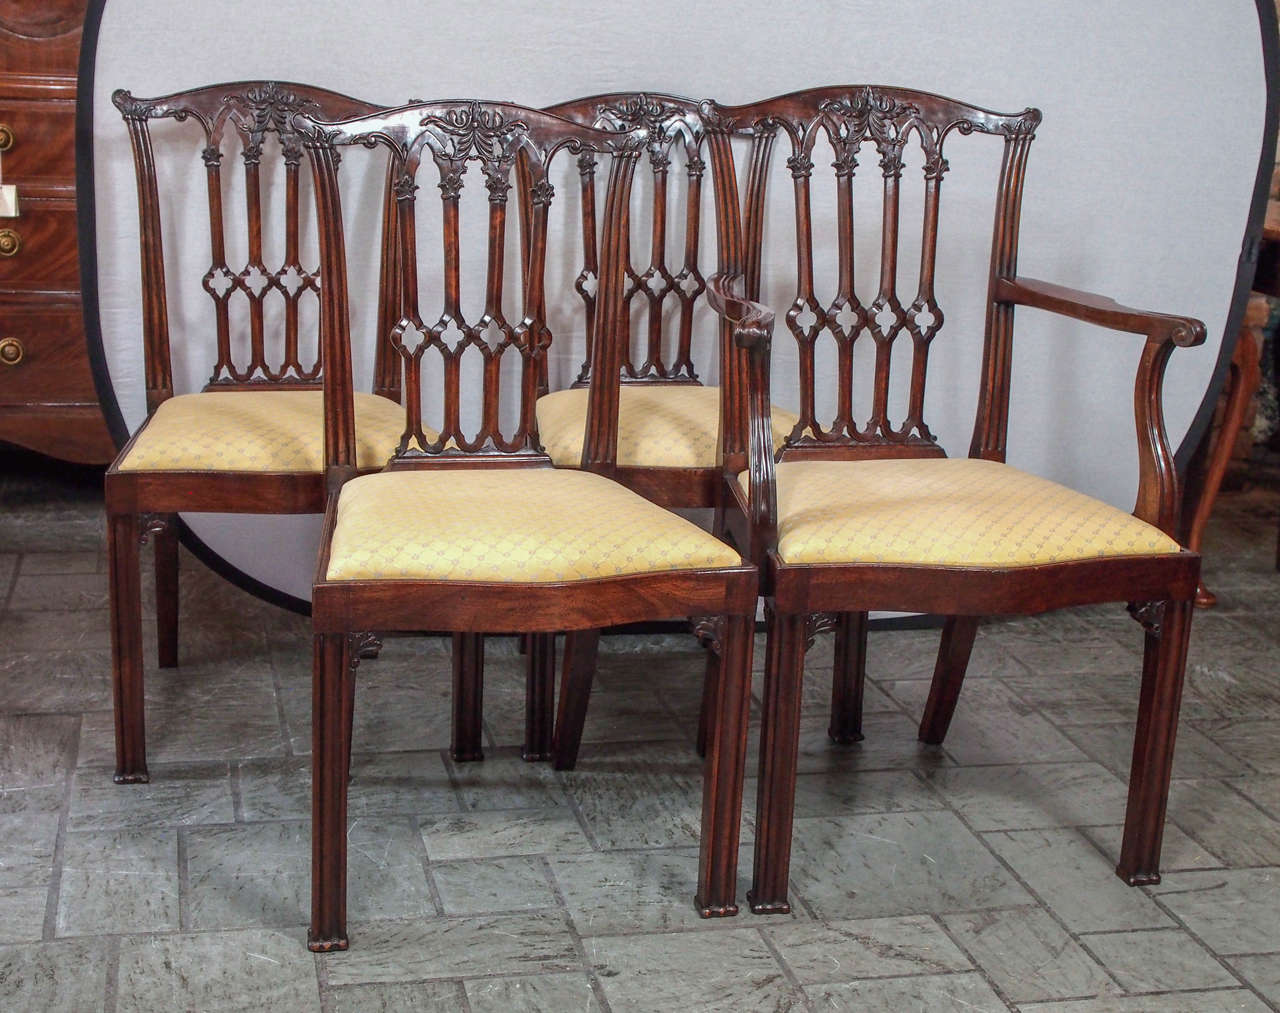 Set of eight antique English mahogany dining chairs (two arms, six sides). Slip-in seats.